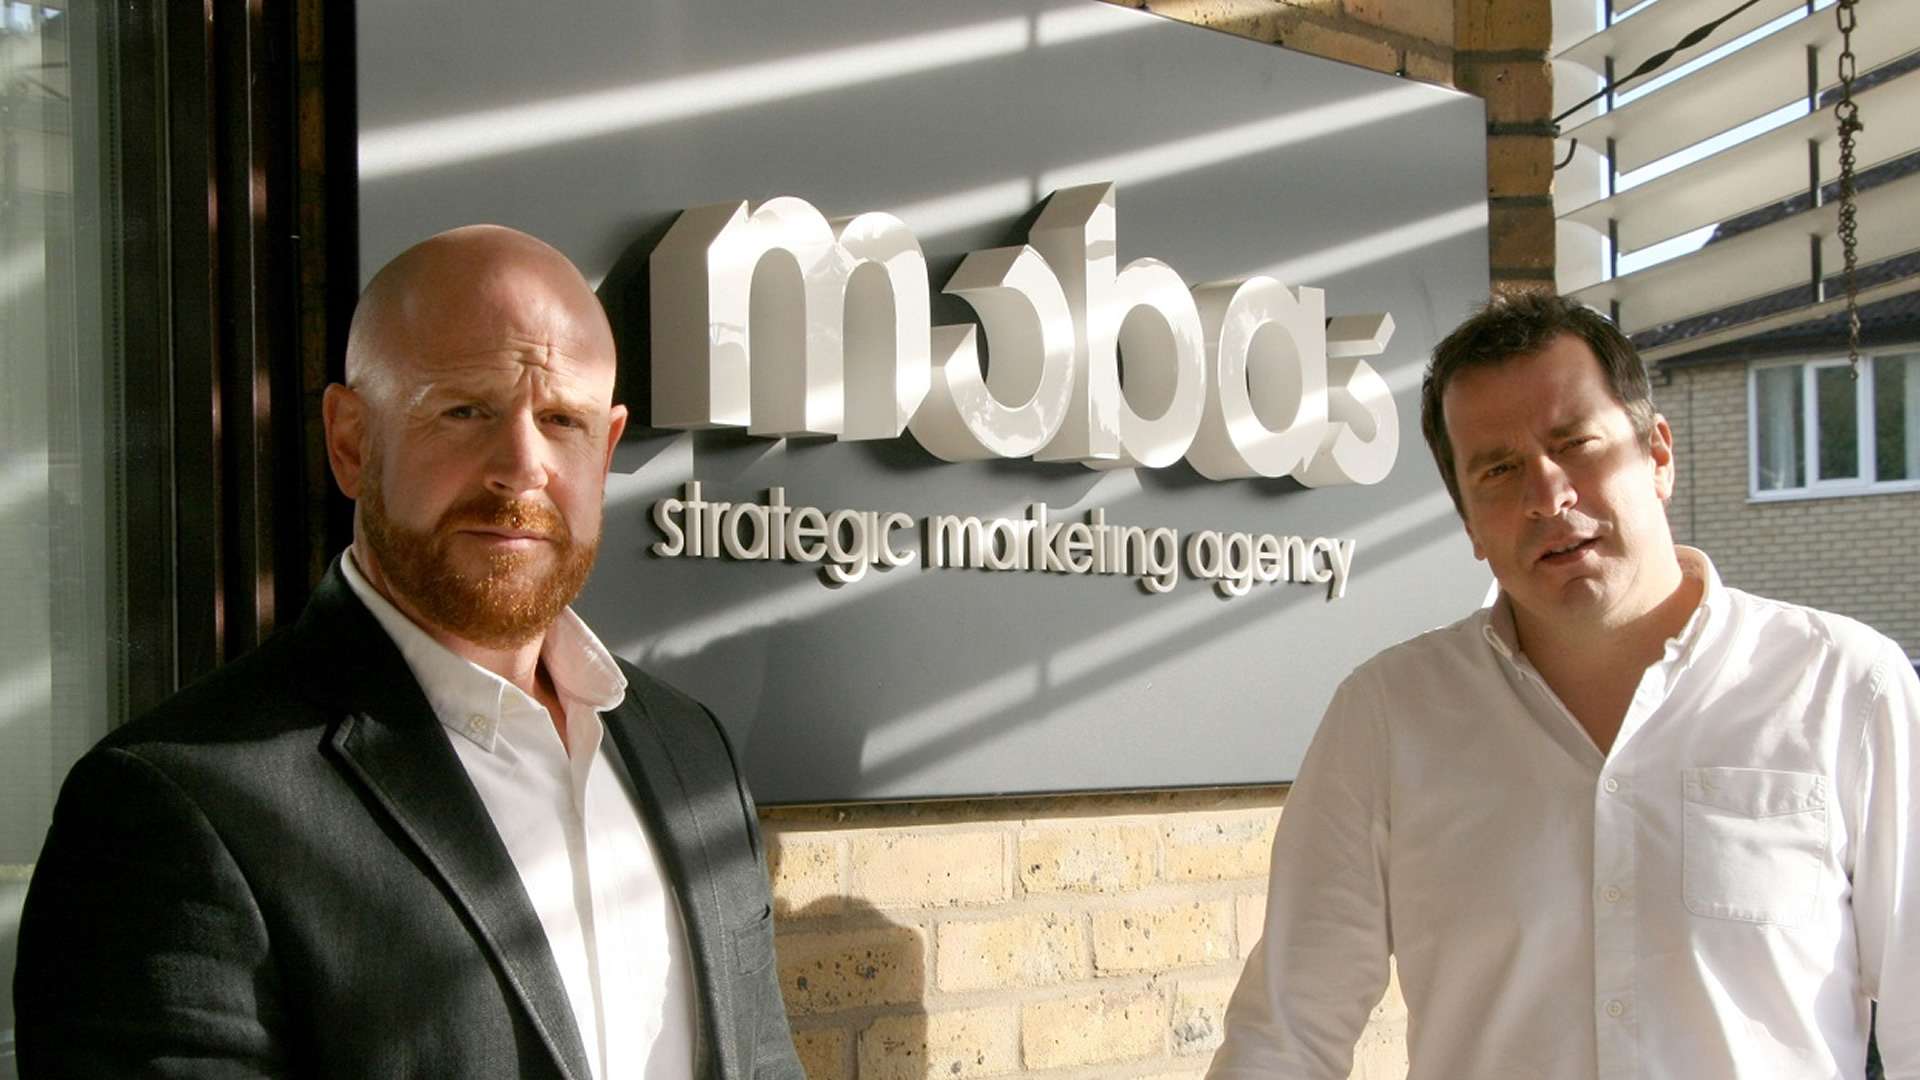 New joint managing directors for strategic marketing agency Mobas